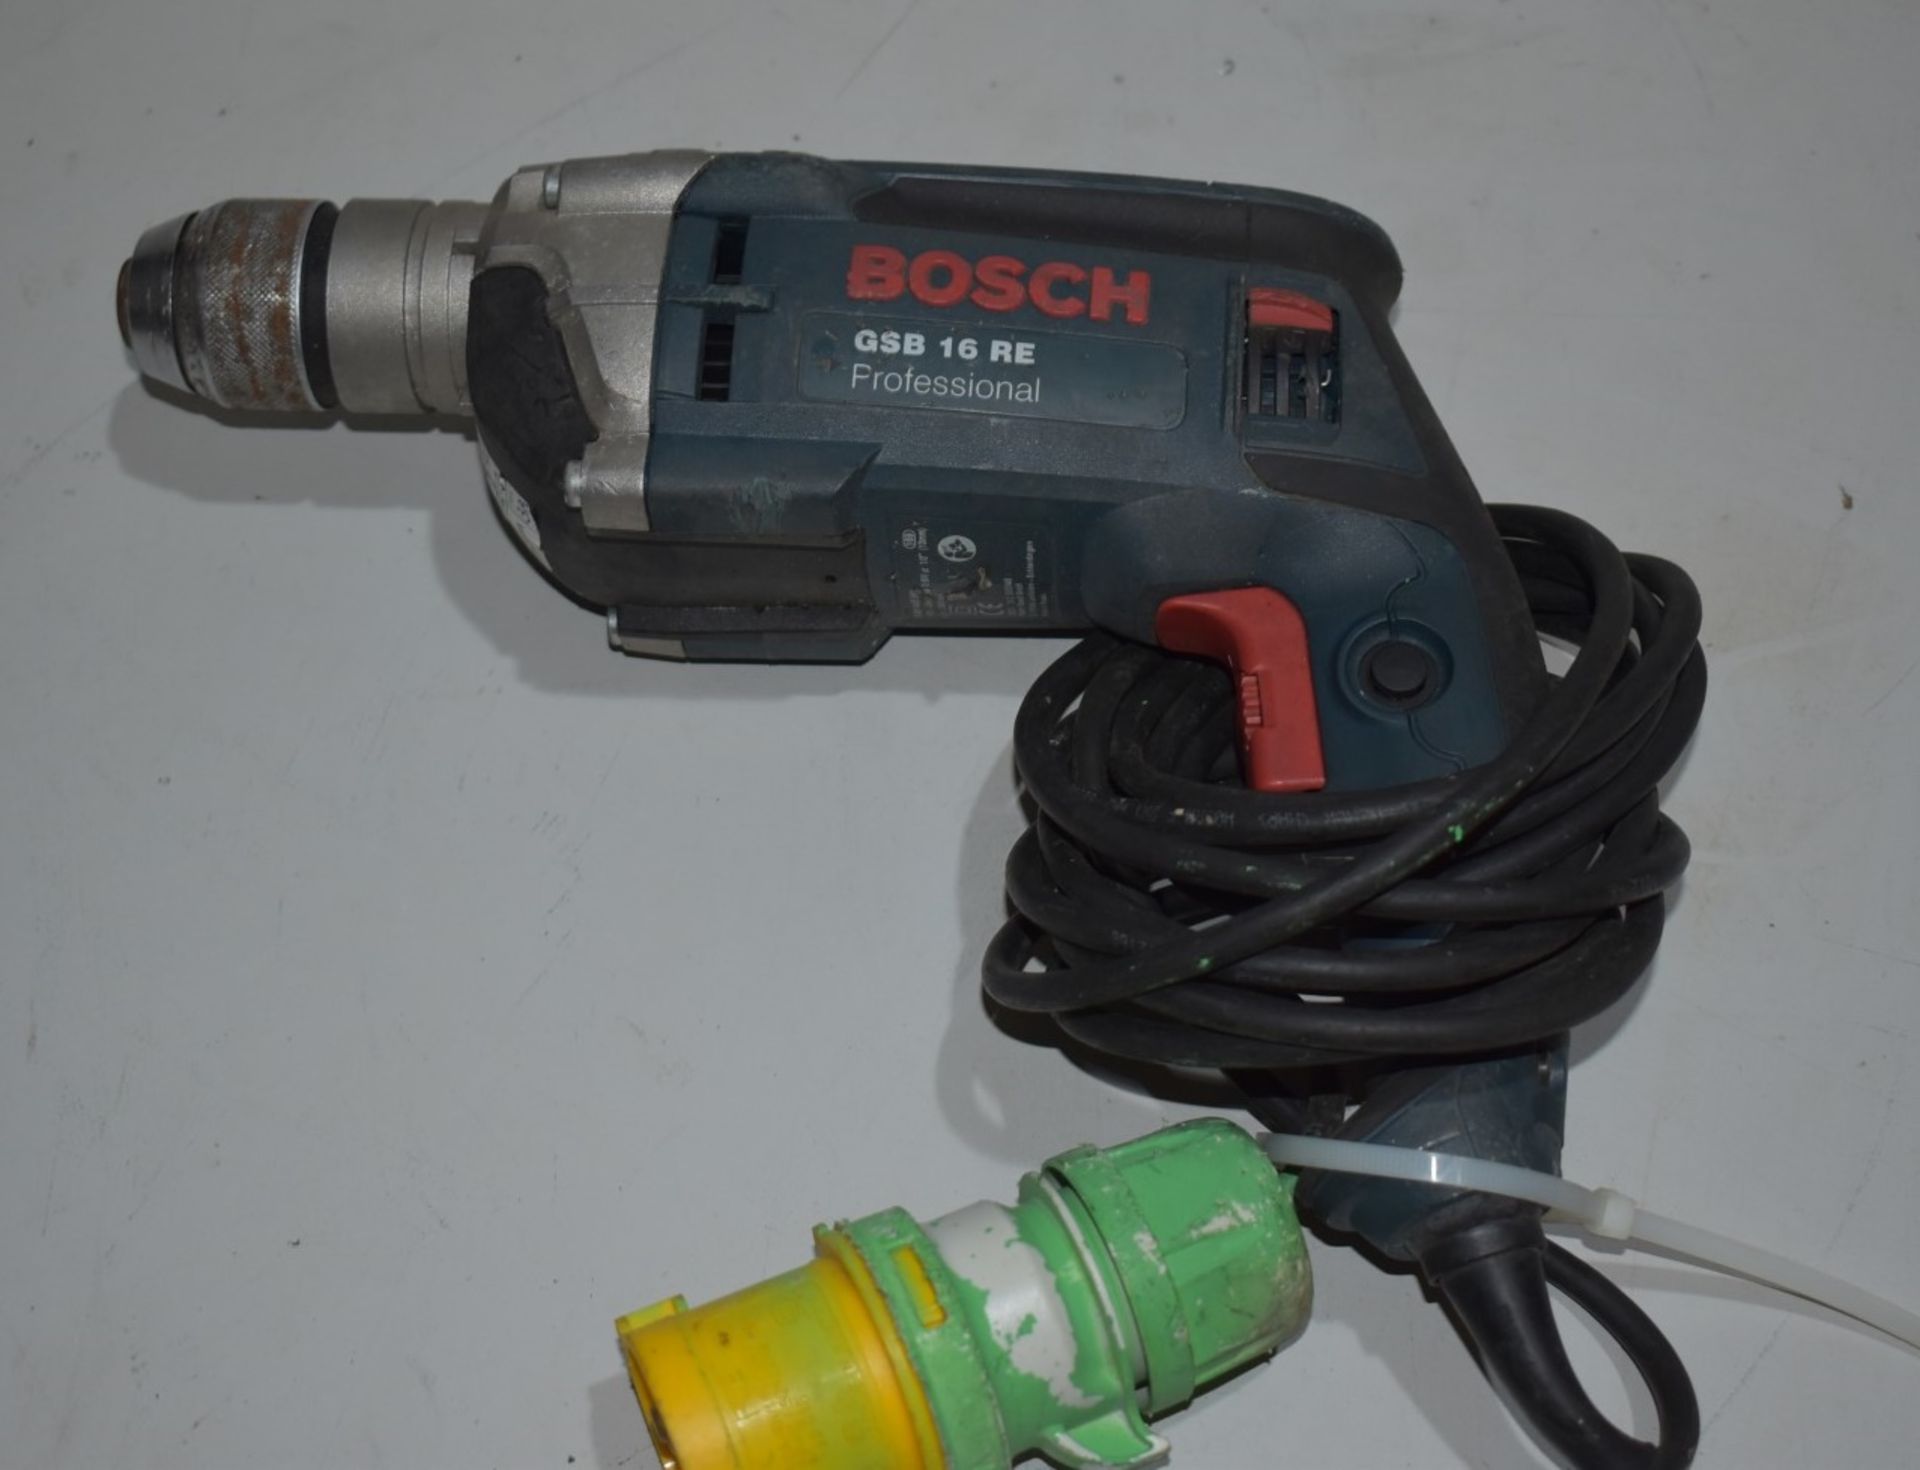 1 x BOSCH GSB 16 RE Professional Impact Drill - Original RRP £182.00 - Ref: DS7529 ALT - CL816 - - Image 3 of 3